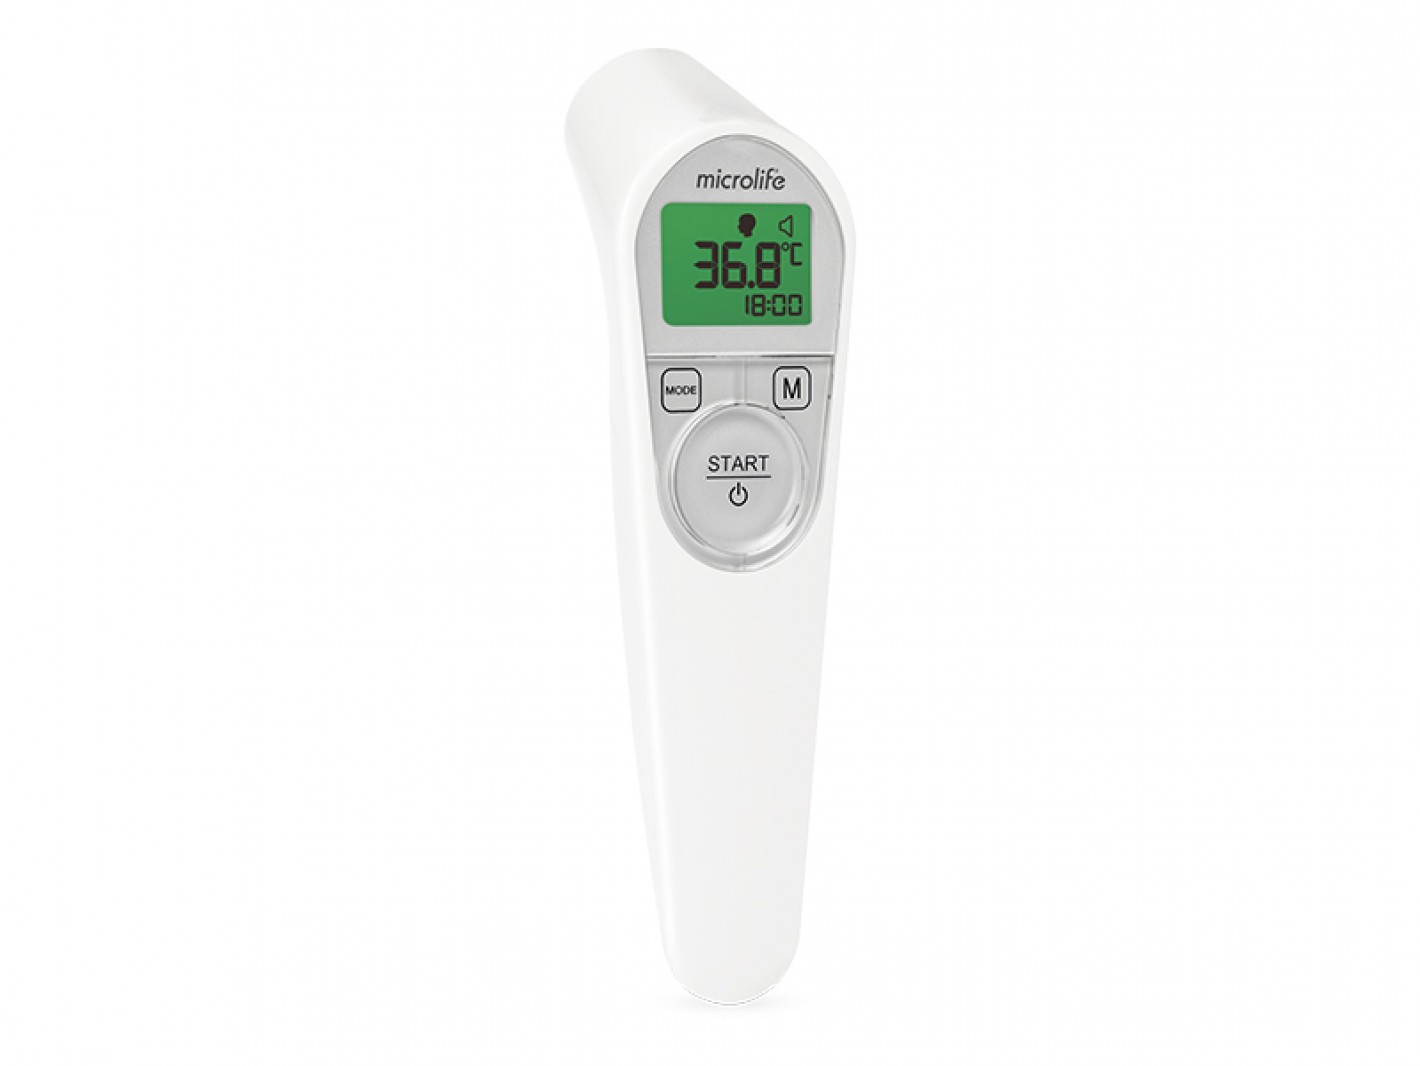 Figure 1: The Microlife “non-contact thermometer NC 200”with auto-measurement and distance control